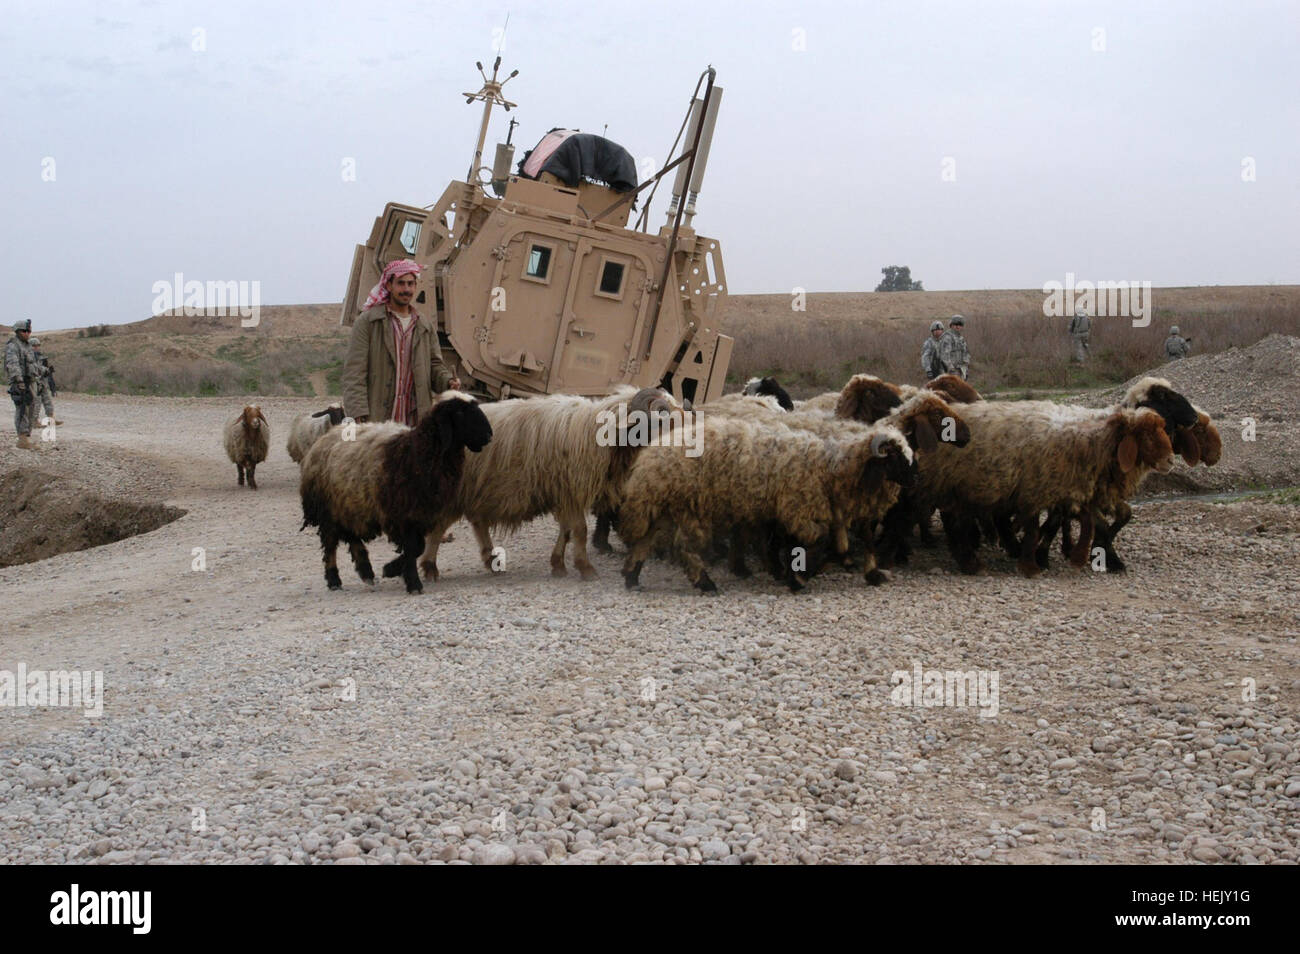 A shepherd walks his flock past a Mine-Resistant, Ambush-Protected truck mired in a sinkhole in Ninewa Province, Jan. 18. The gun truck belongs to Soldiers with 3rd Platoon, 204th Military Police Company, 519th MP Battalion, headquartered in Fort Polk, La. Members of the Q-West quick reaction force for recovering vehicles - manned by C Company, 2nd Battalion, 198th Combined Arms, 155th Brigade Combat Team, out of Oxford and Indianola, Miss. - recovered the vehicle. Mississippi Guardsmen recover vehicles throughout northern Iraq 245587 Stock Photo